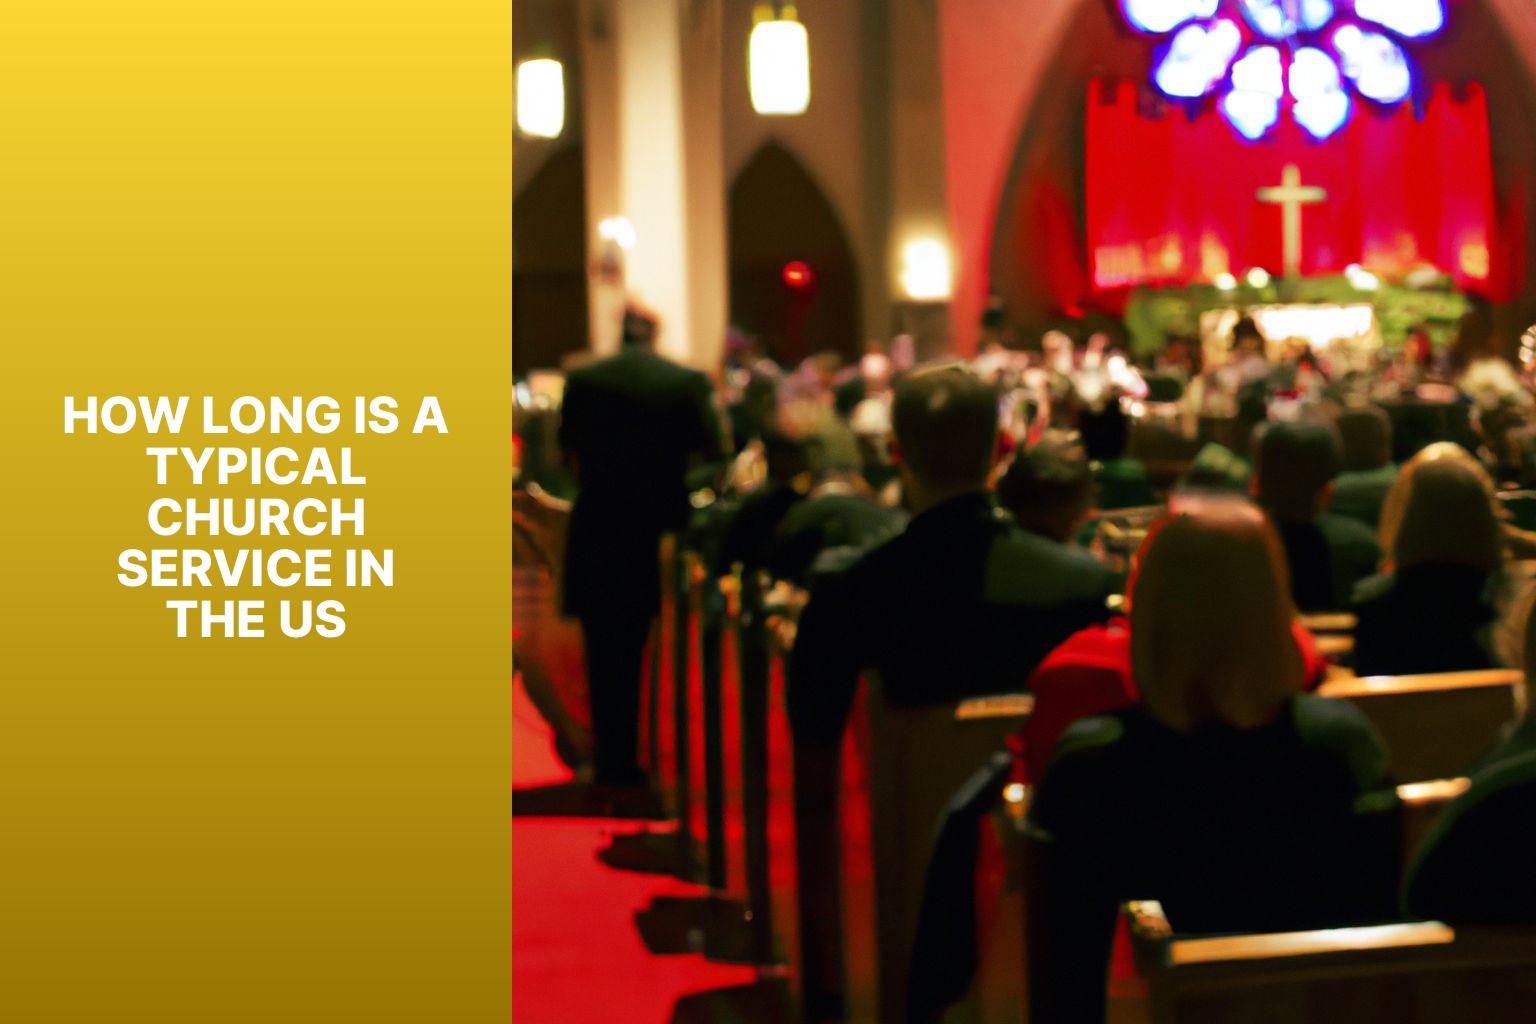 How long is a typical church service in the US